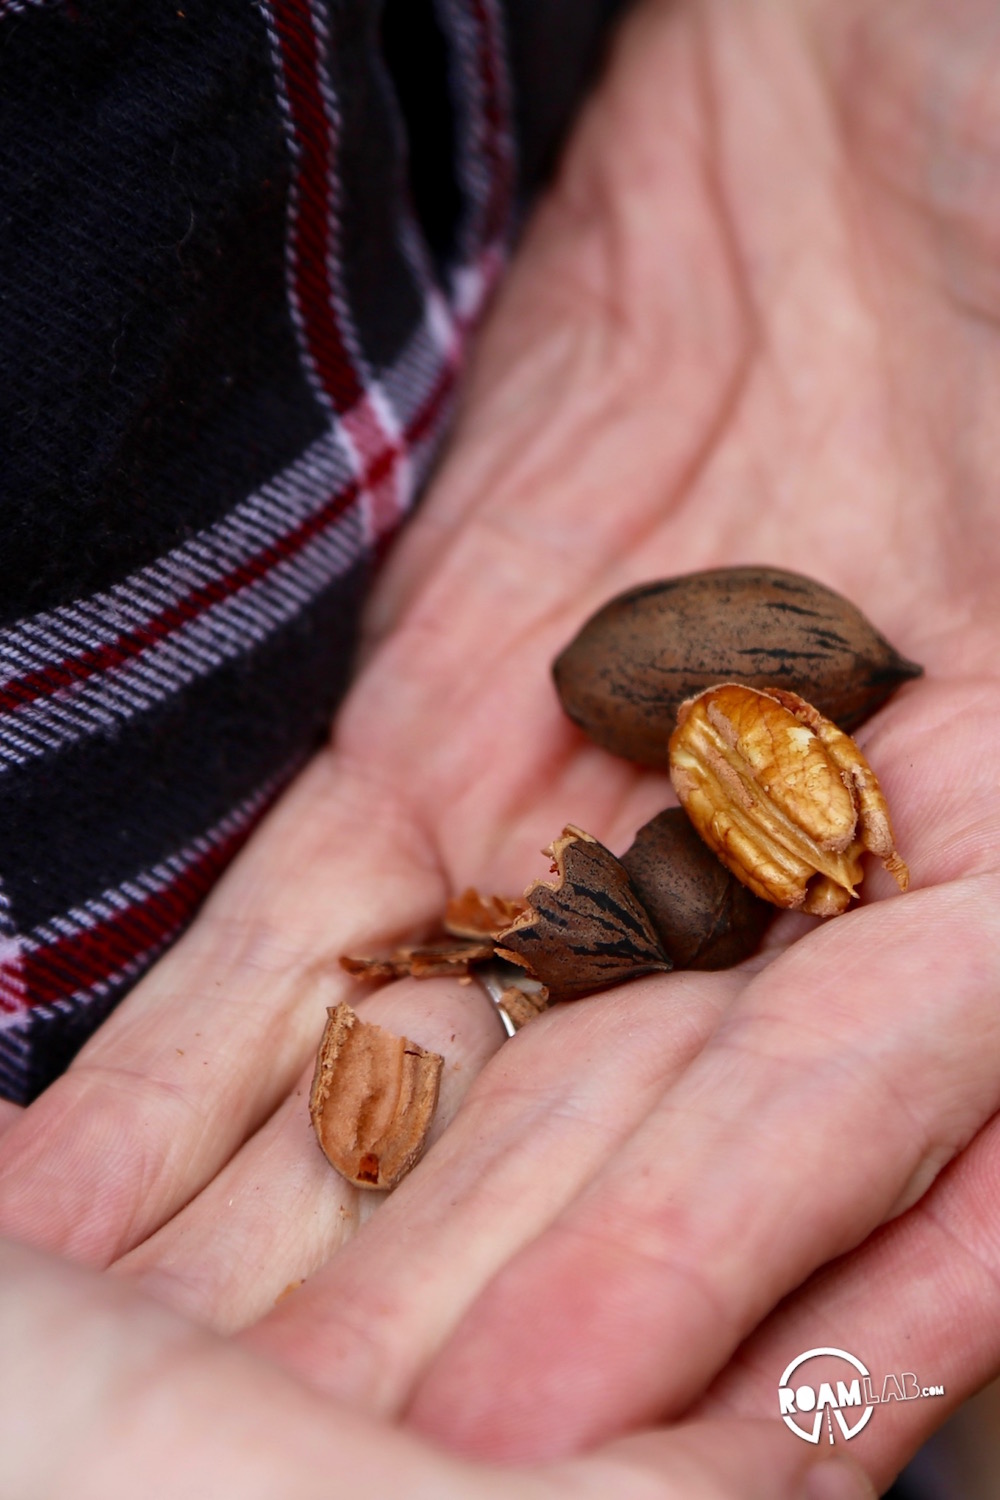 I had never had a fresh pecan before, but they were just lying on the ground for the taking. It was almost as if pecans grew on trees!